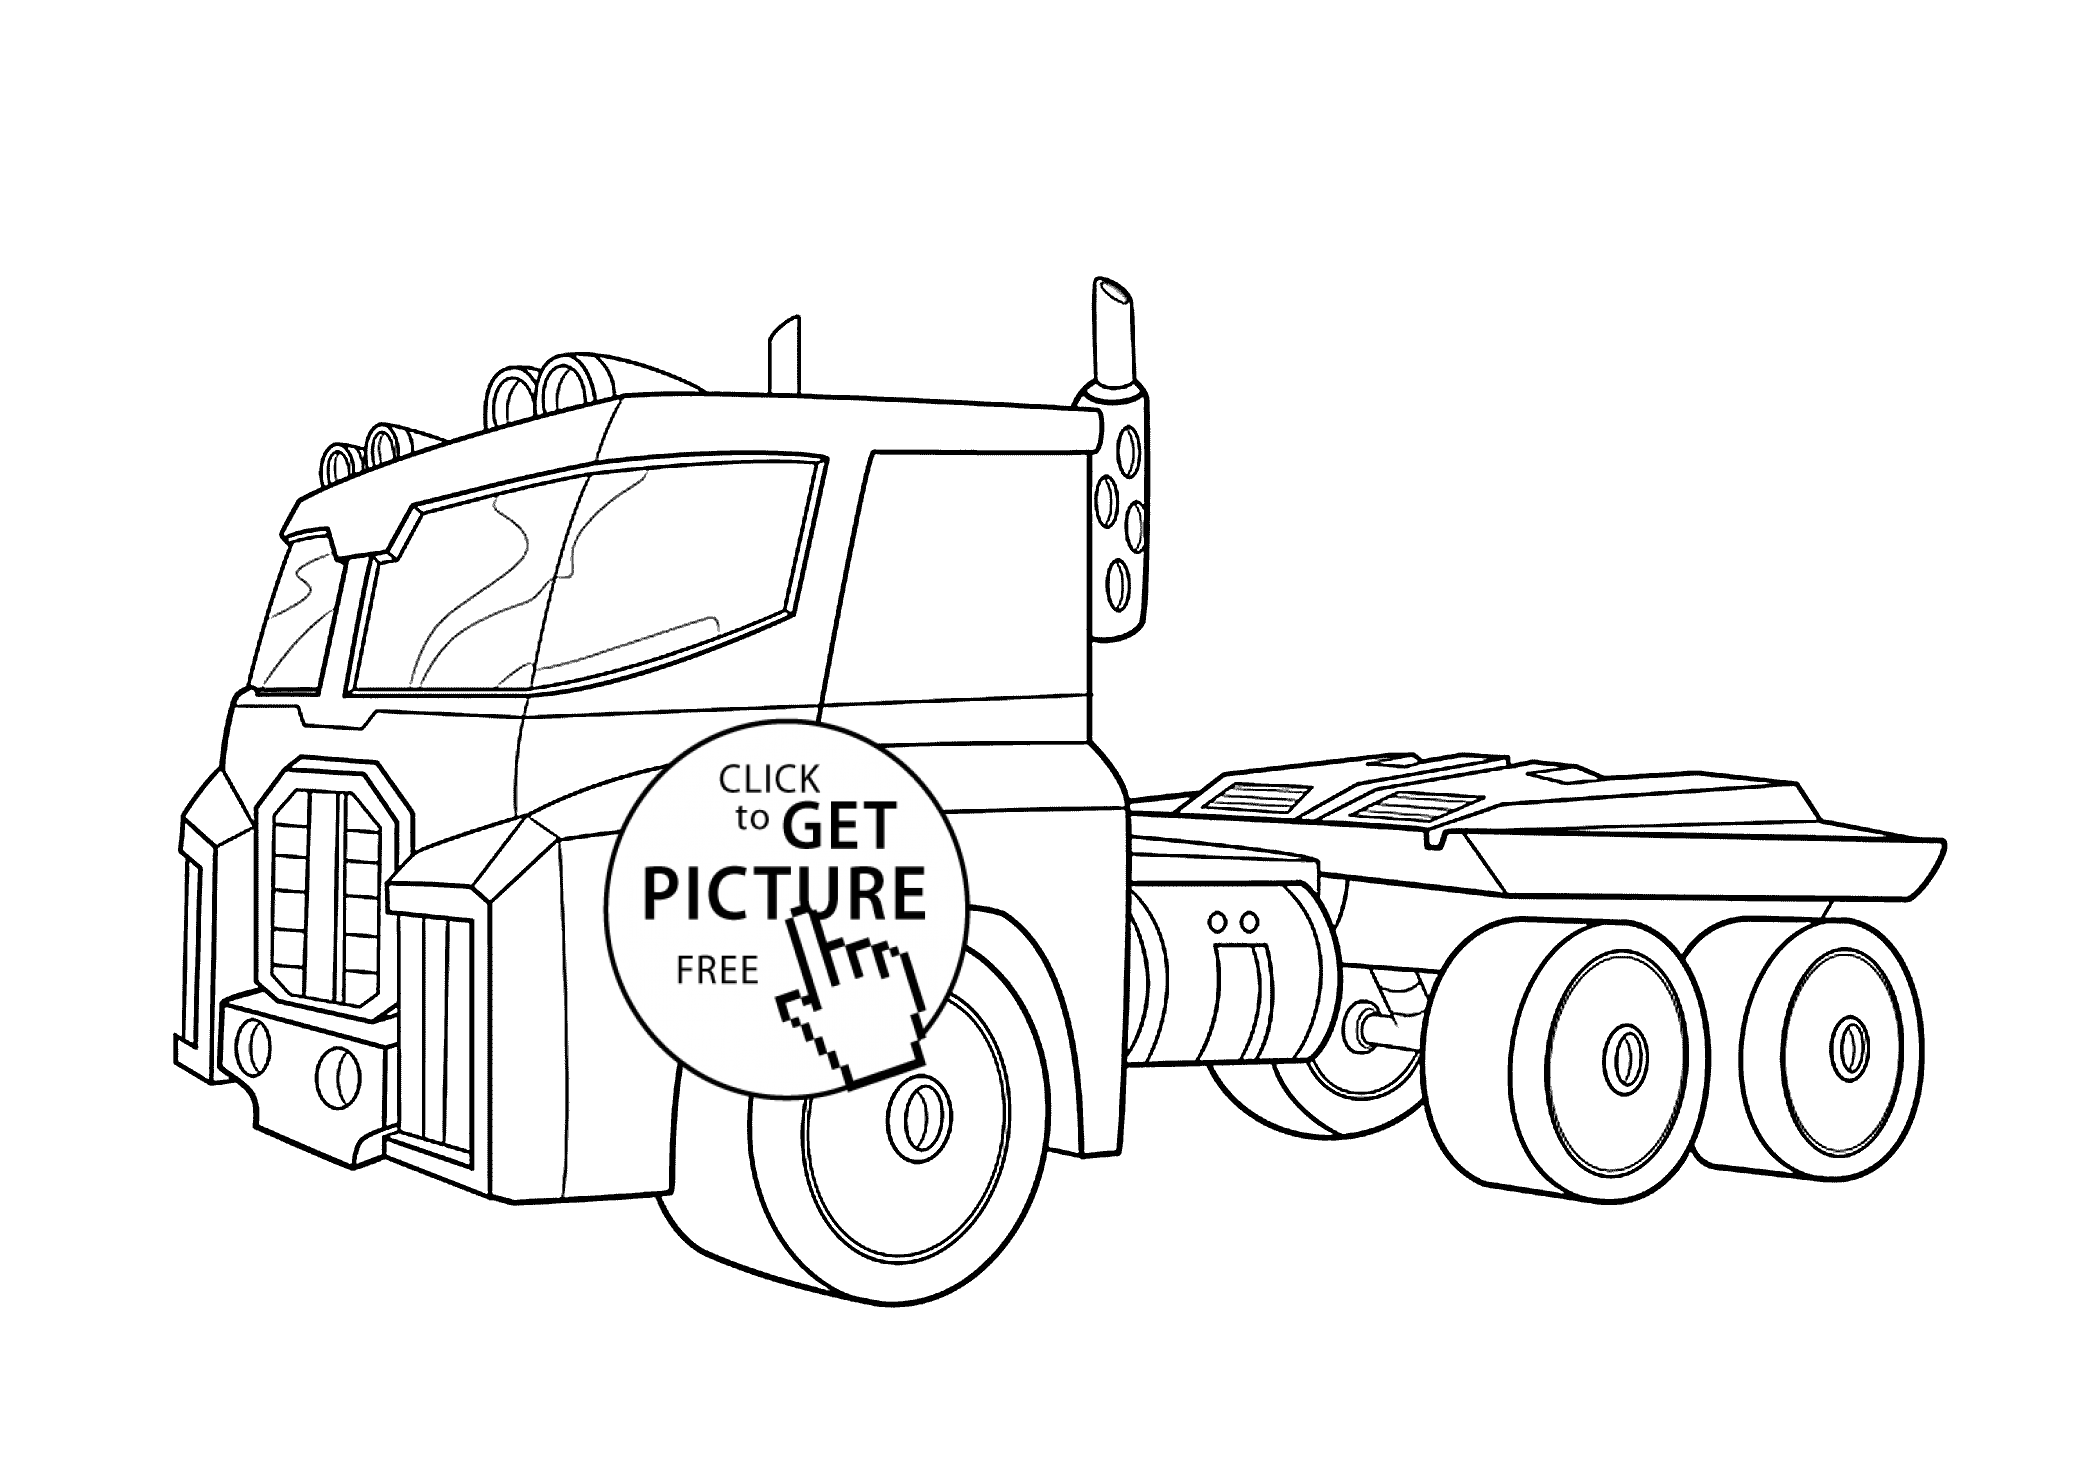 Optimus Prime bot coloring pages for kids, printable free - Rescue ...